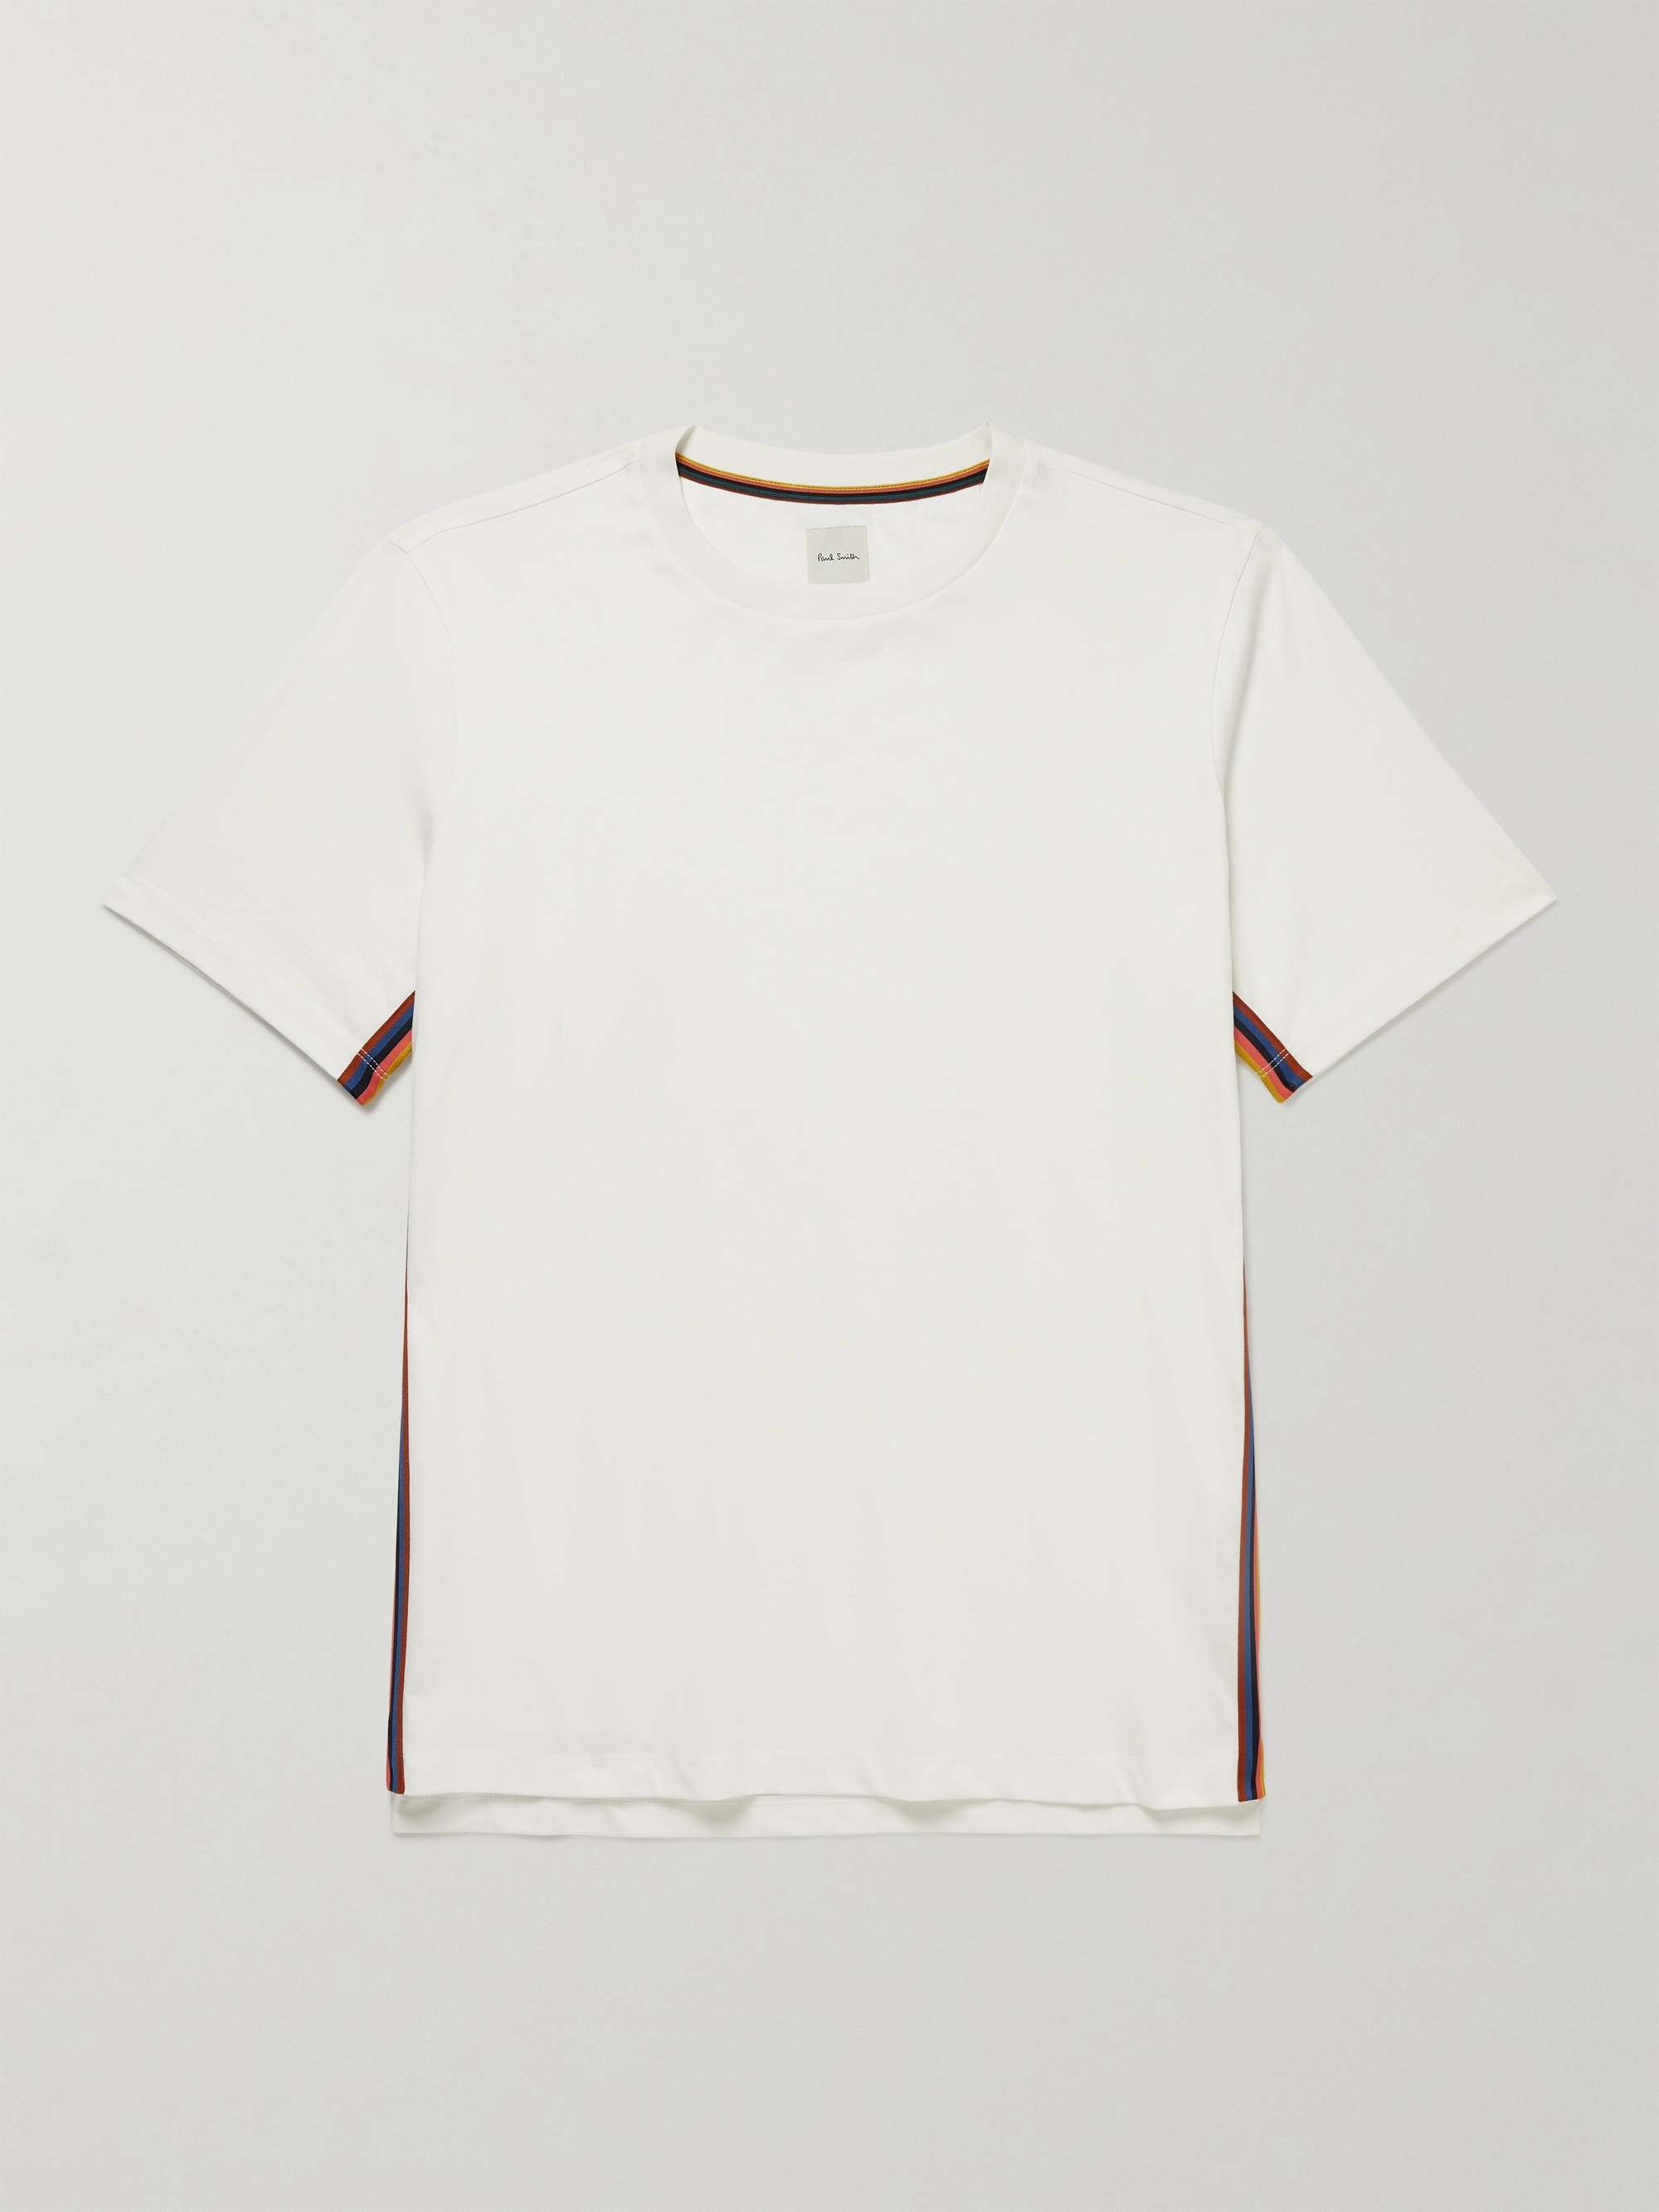 PAUL SMITH Striped Webbing-Trimmed Cotton-Jersey T-Shirt